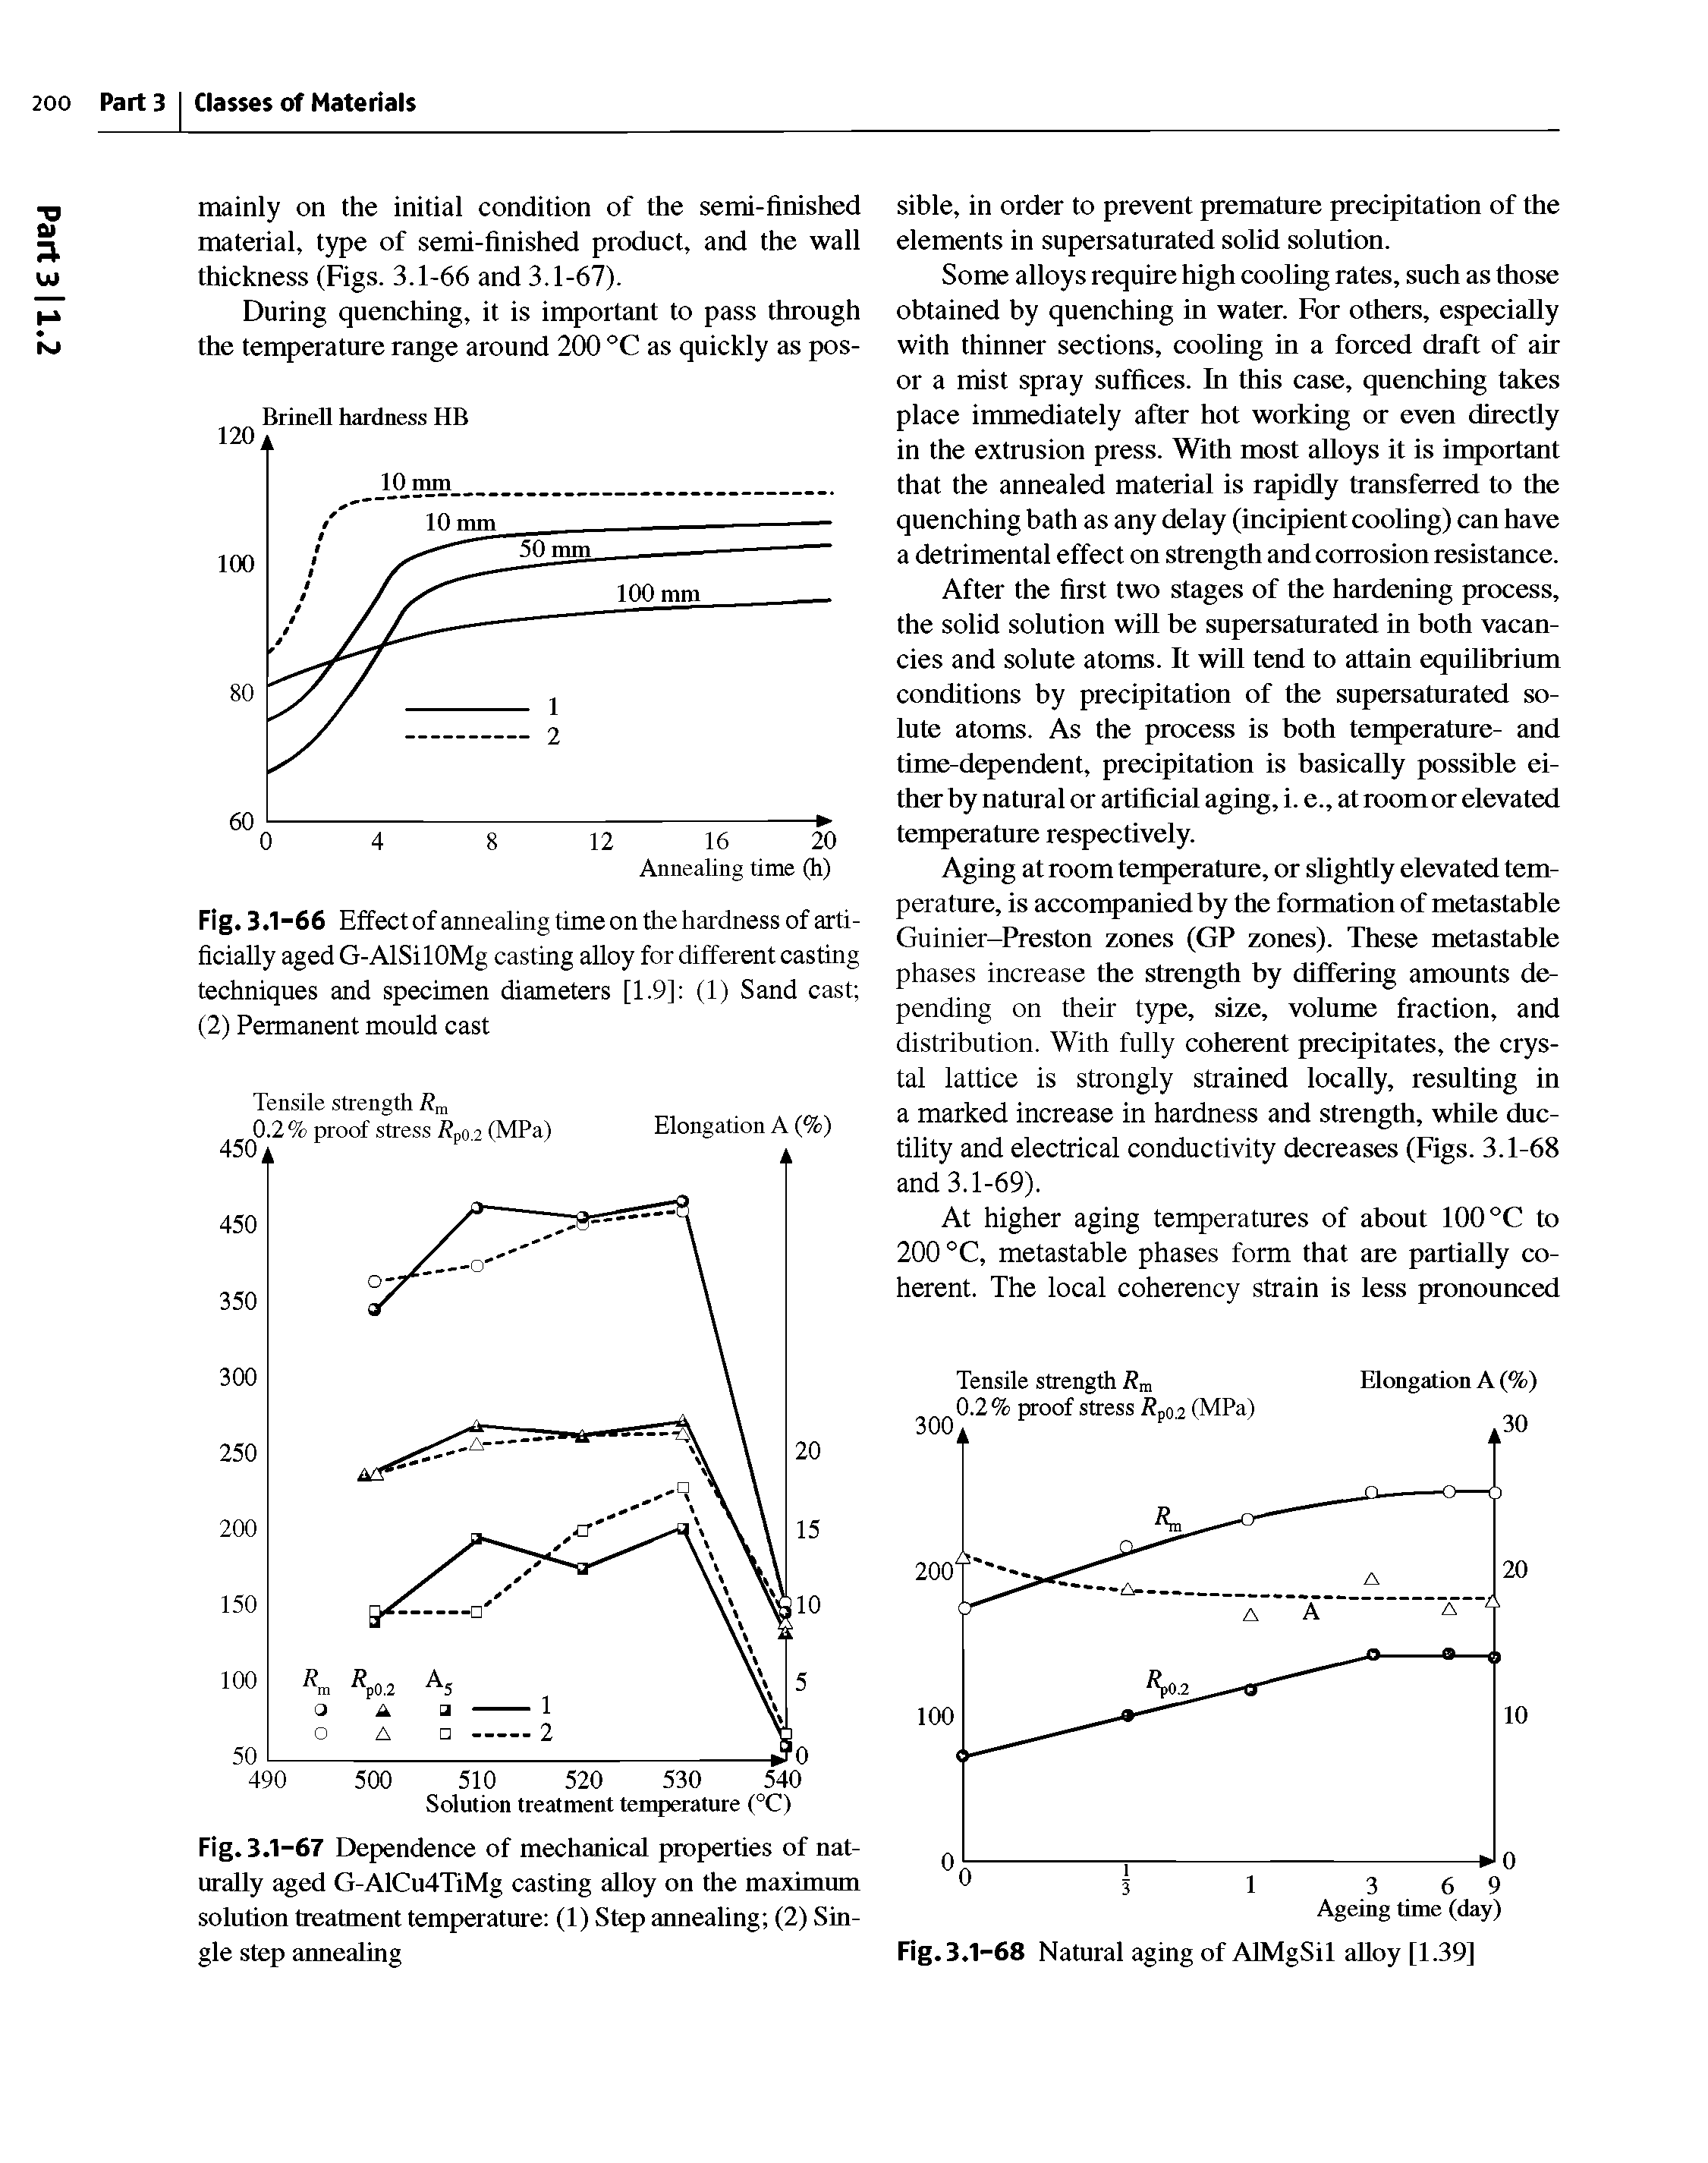 Fig. 3.1-66 Effect of annealing time on the hardness of artificially aged G-AlSilOMg casting alloy for different casting techniques and specimen diameters [1.9] (1) Sand cast (2) Permanent mould cast...